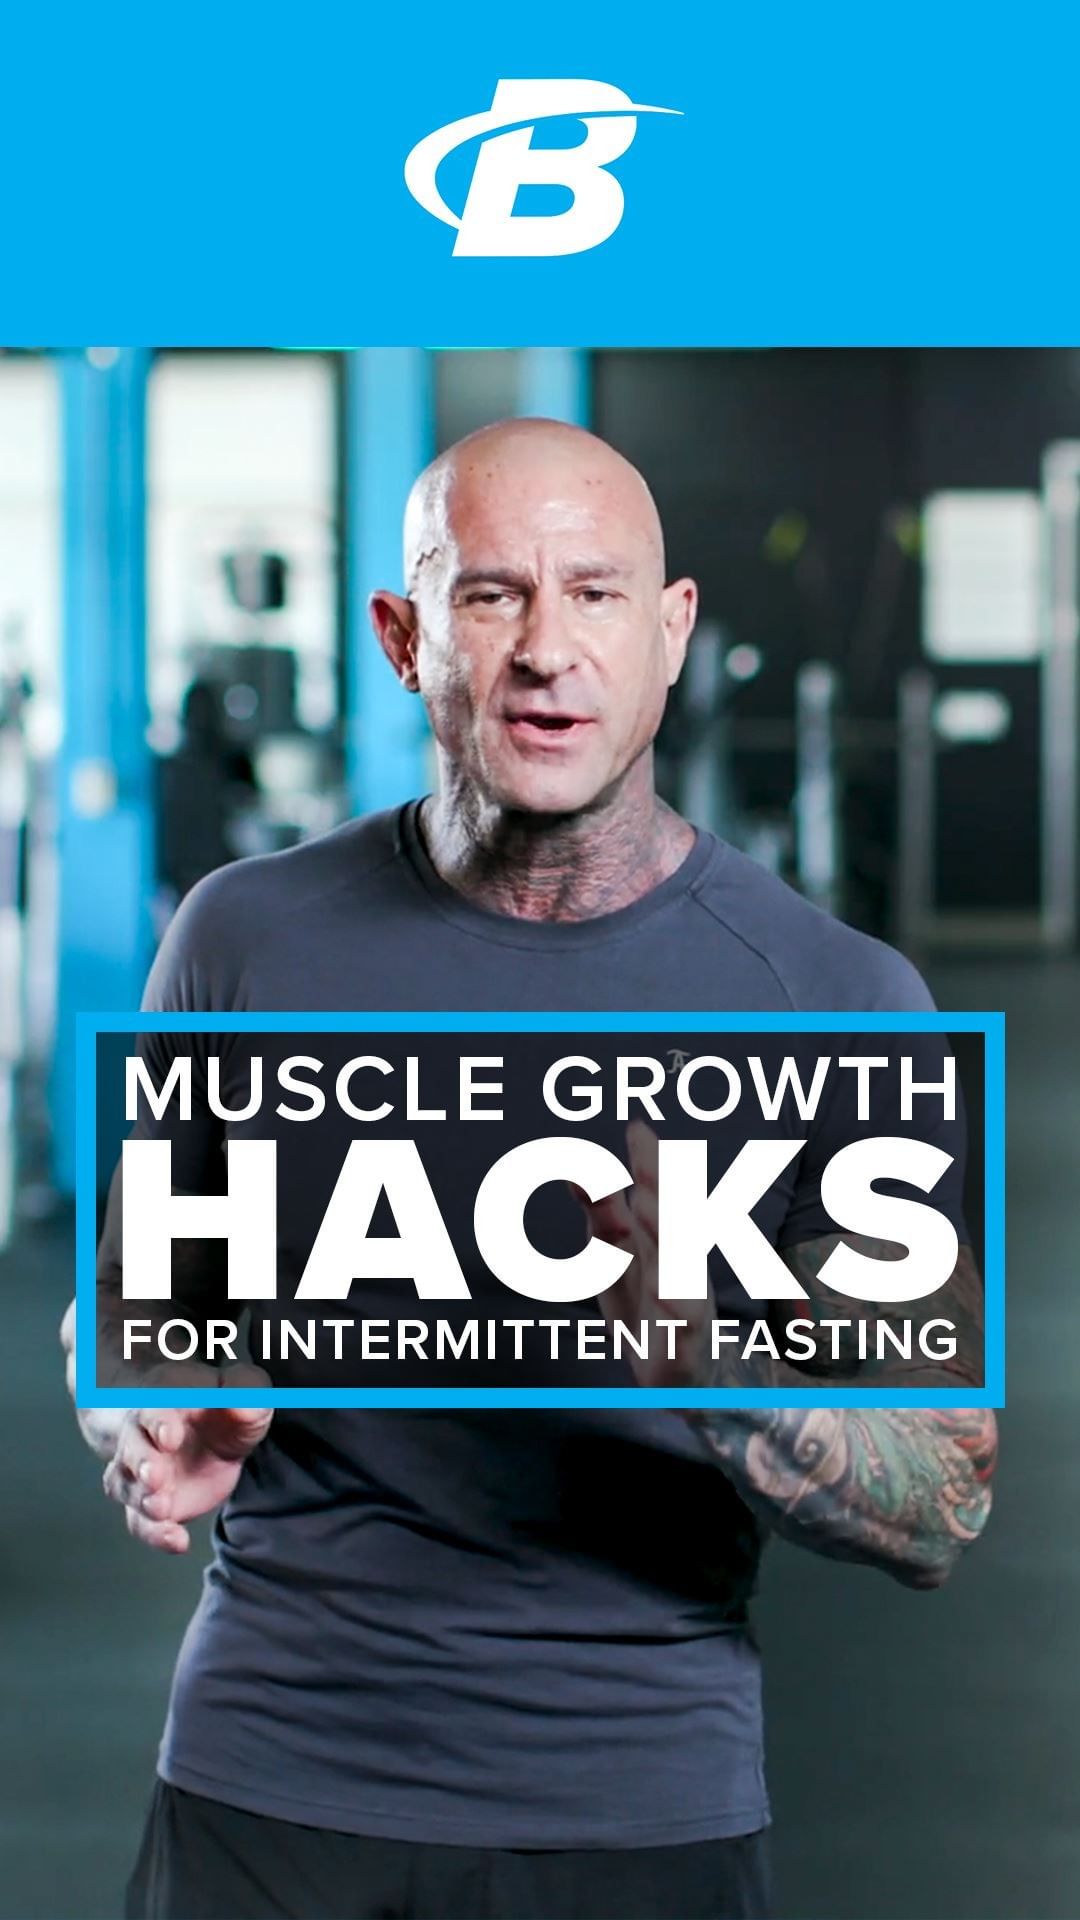 Bodybuilding.com - In this video, Doctor Jim Stoppani is going to teach you 4 hacks for maximizing muscle growth while intermittent fasting. 

► Jim Stoppani's Shortcut to Strength Program (LINk IN BI...